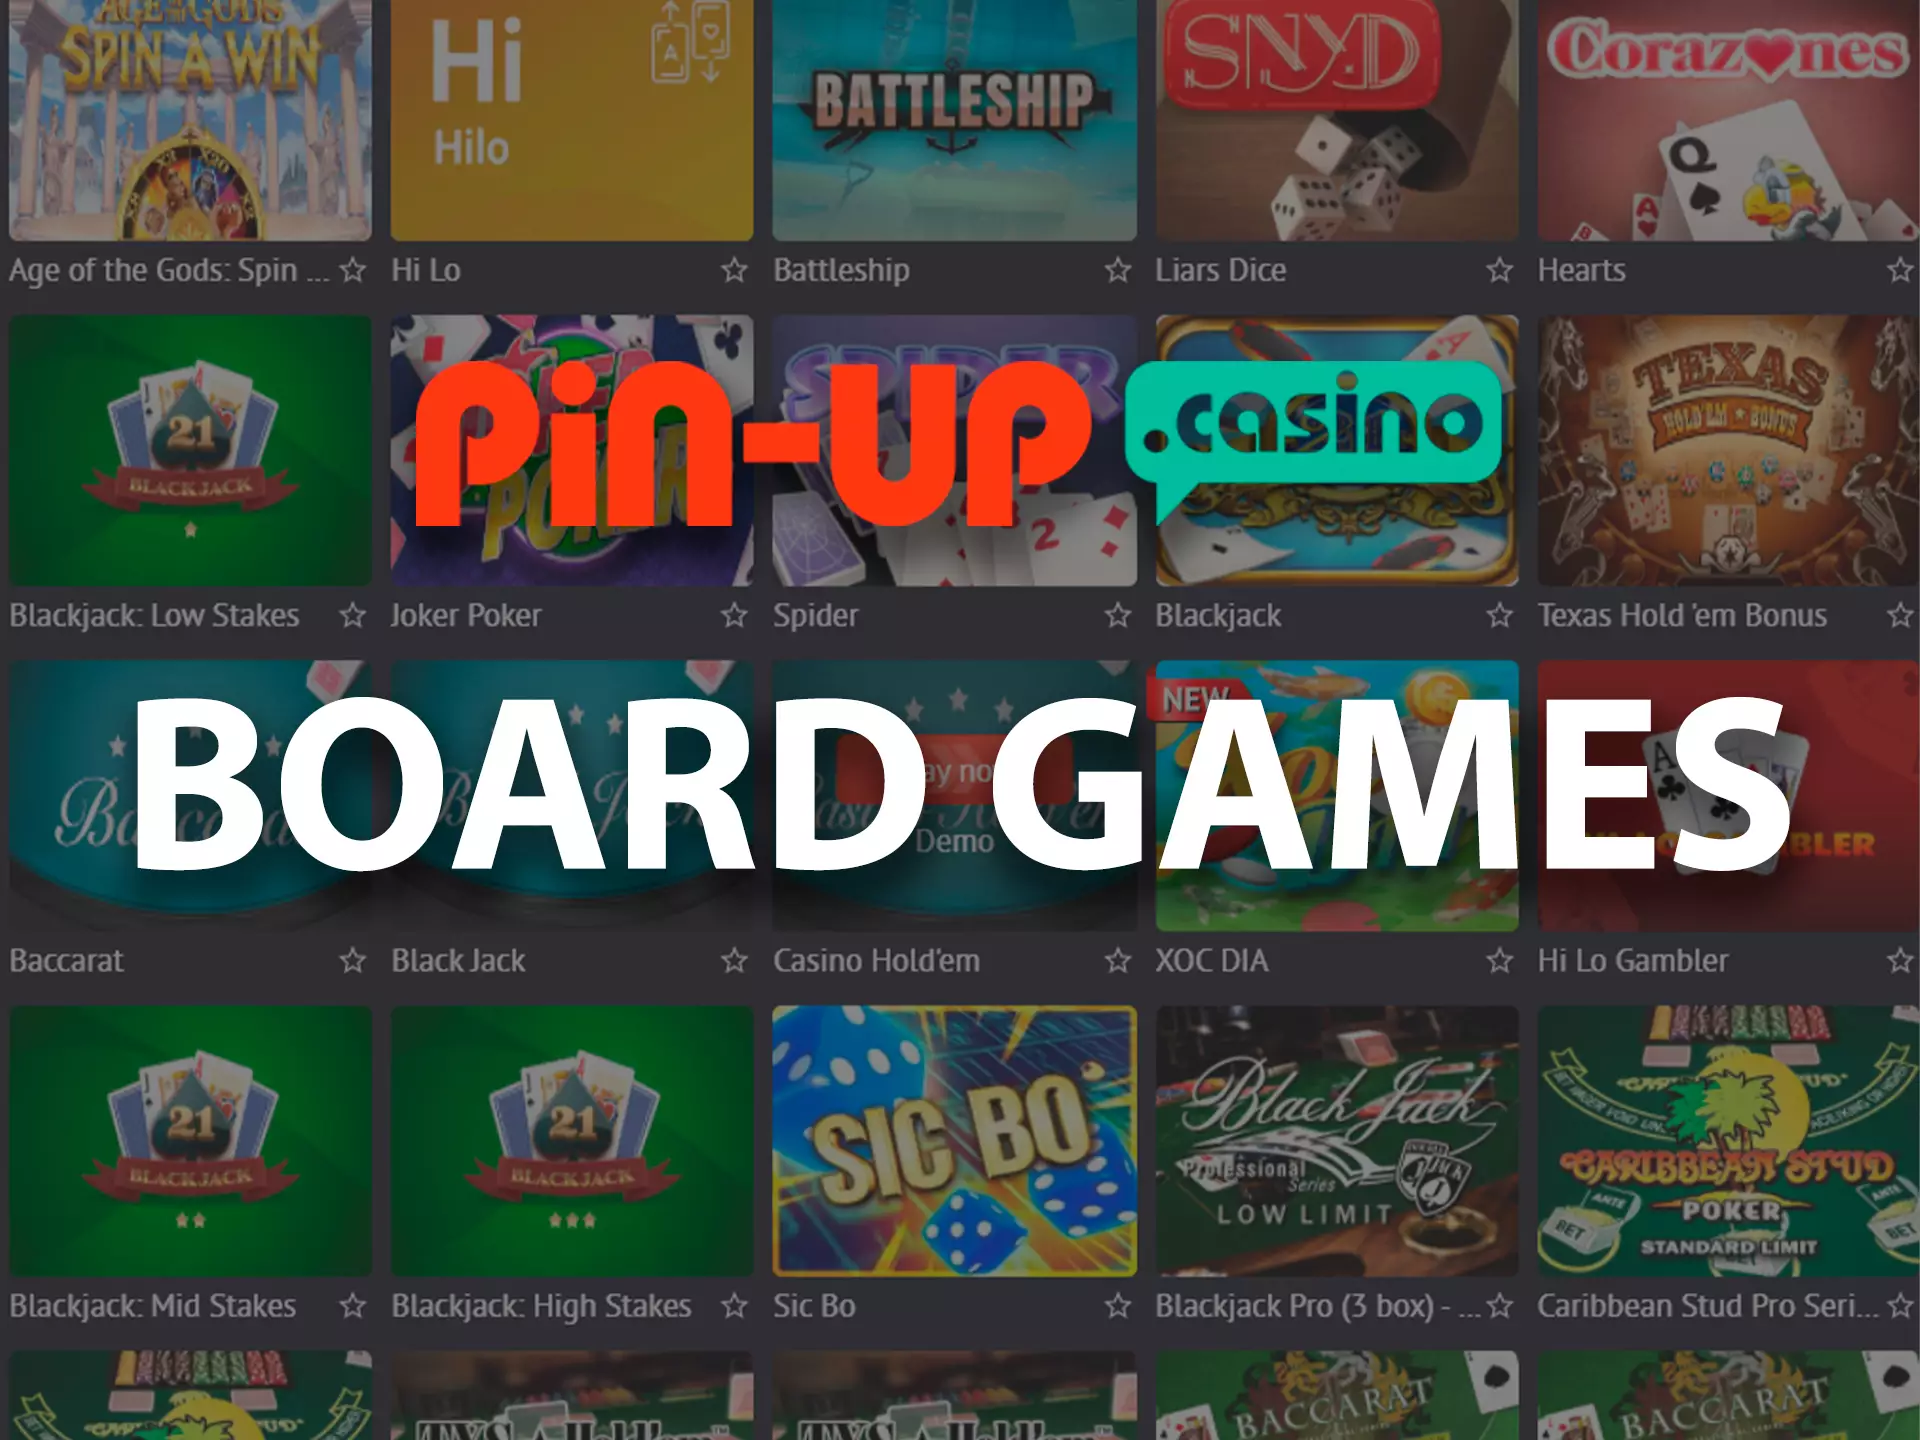 Most of the traditional and popular board games are presented in the Pin-Up Casino.